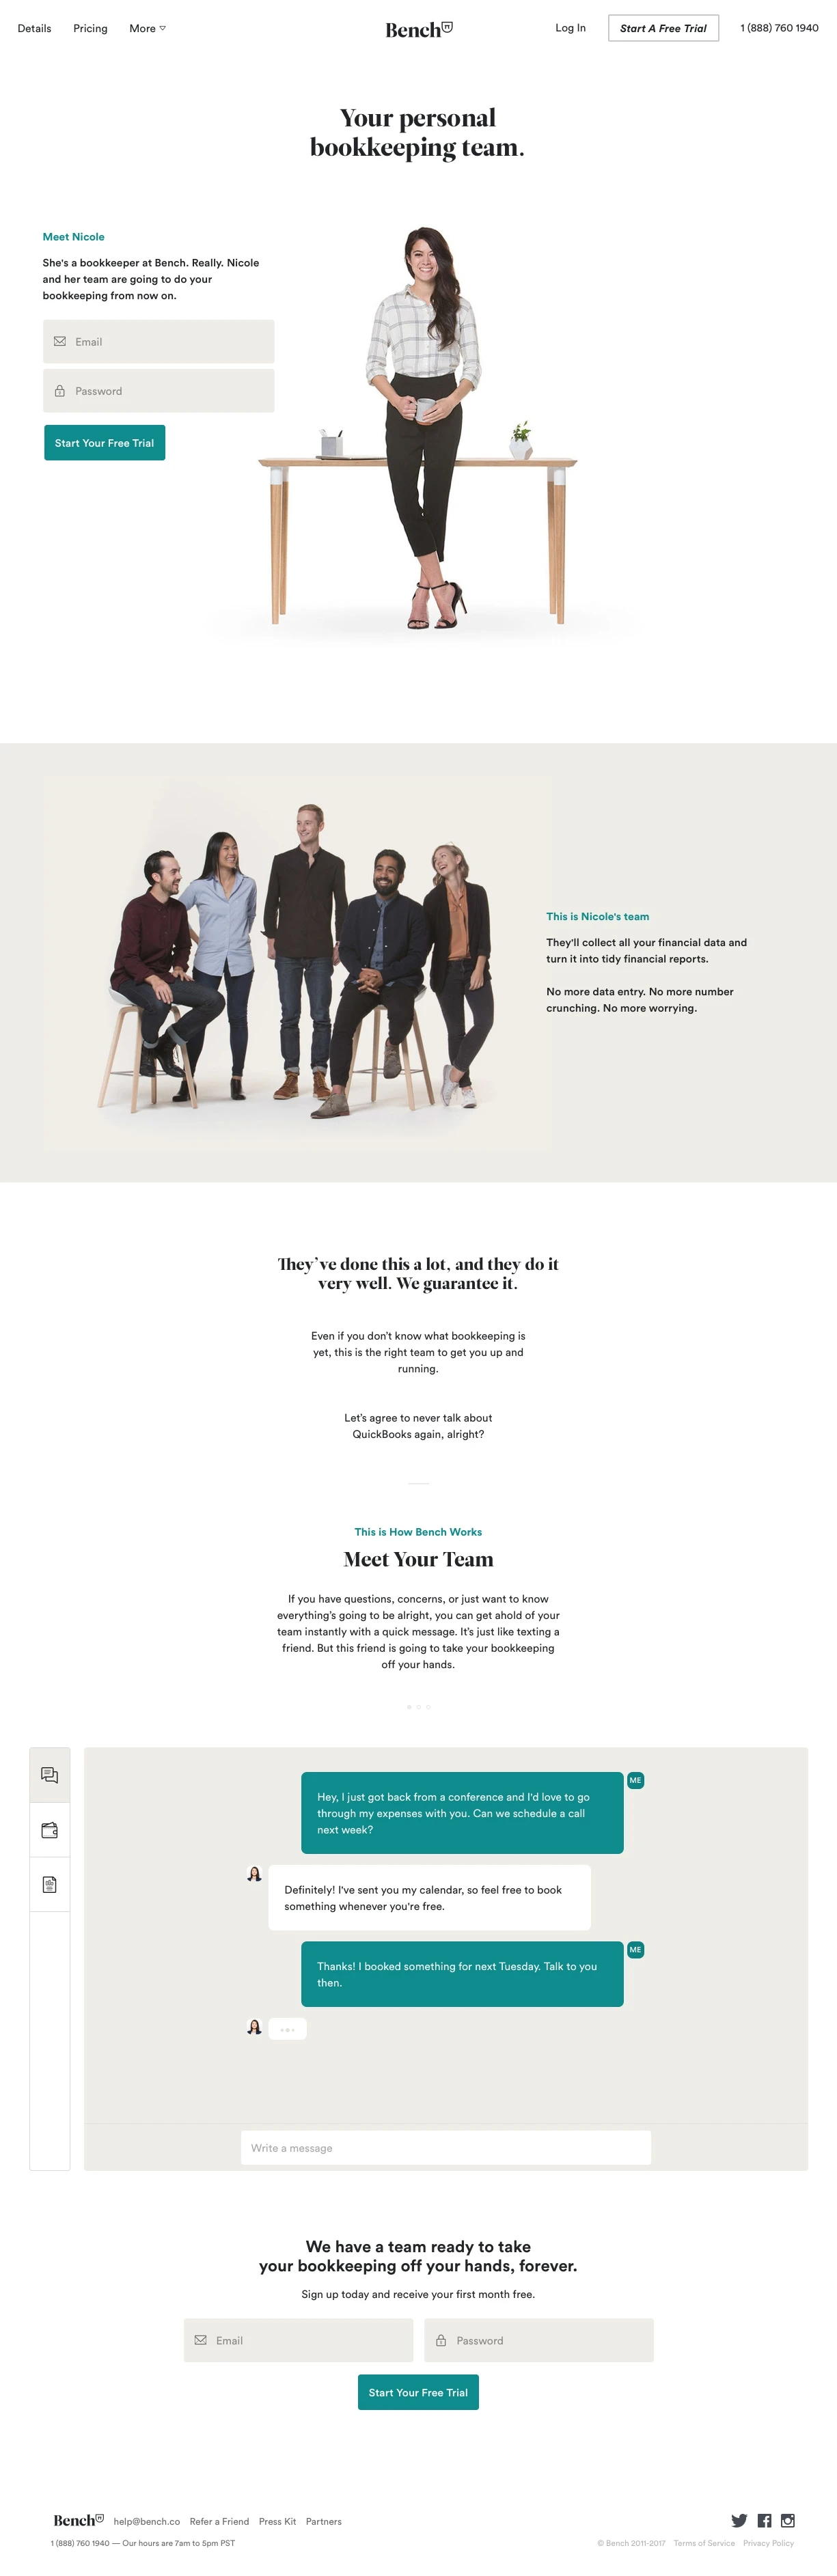 Bench Landing Page Example: Bench is an online bookkeeping service. We pair you with a team of professional bookkeepers who do your bookkeeping, so you don't have to.